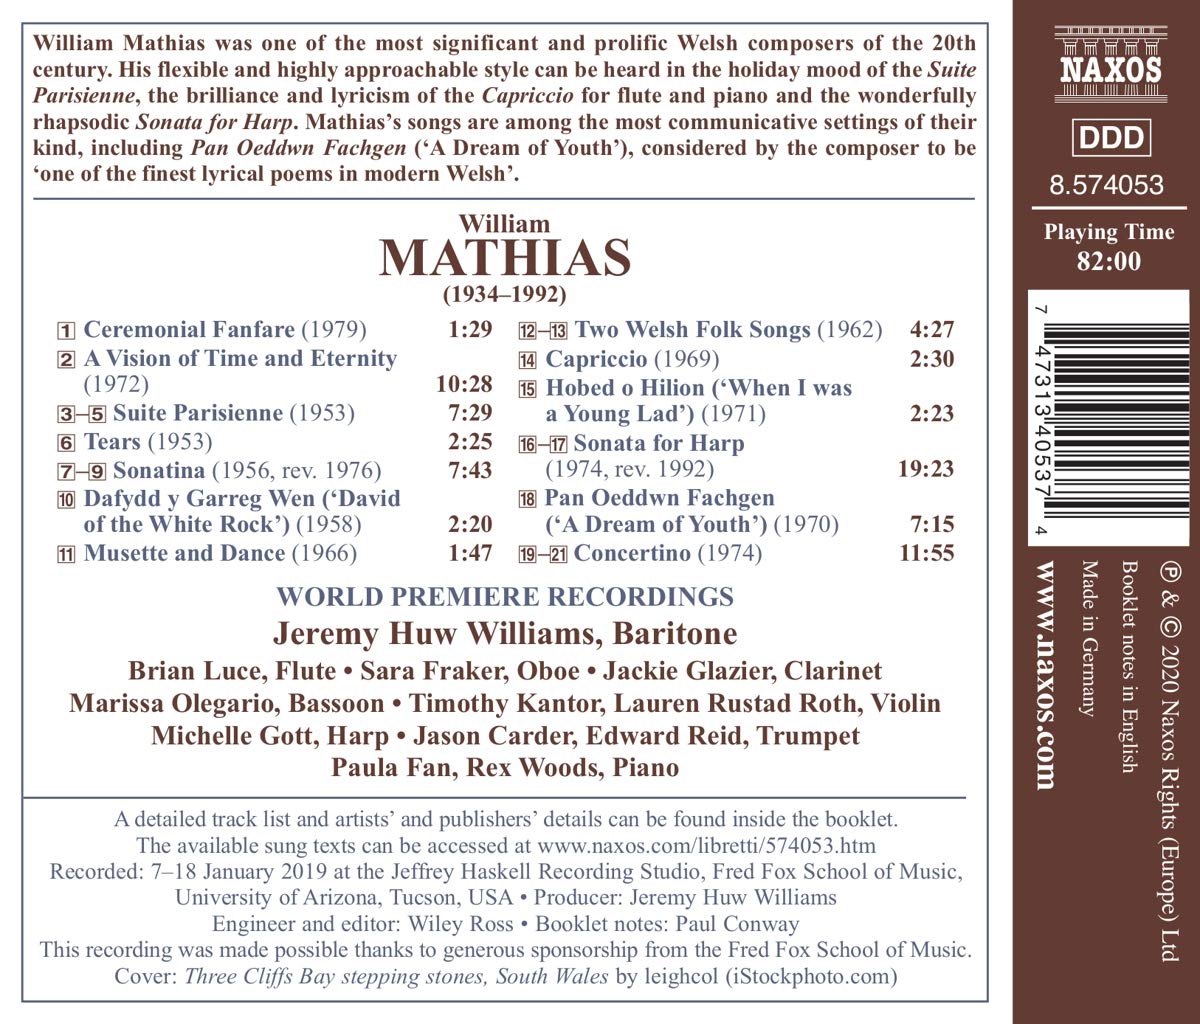 Jeremy Huw Williams 윌리엄 마티아스: 가곡과 실내악 작품집 (William Mathias: A Vision of Time and Eternity - Songs and Chamber Music)